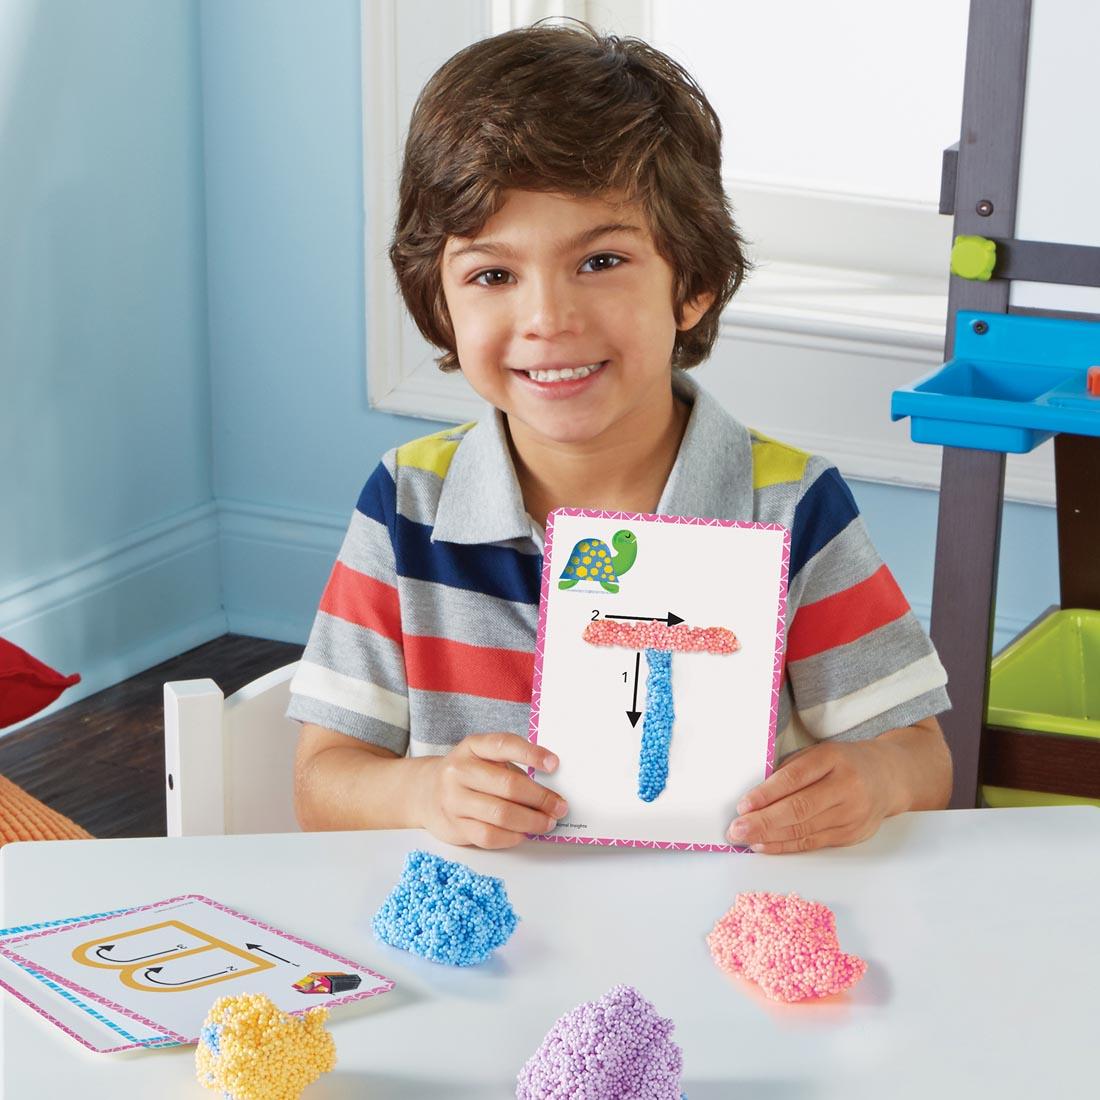 child using playfoam to shape letters onto learning cards